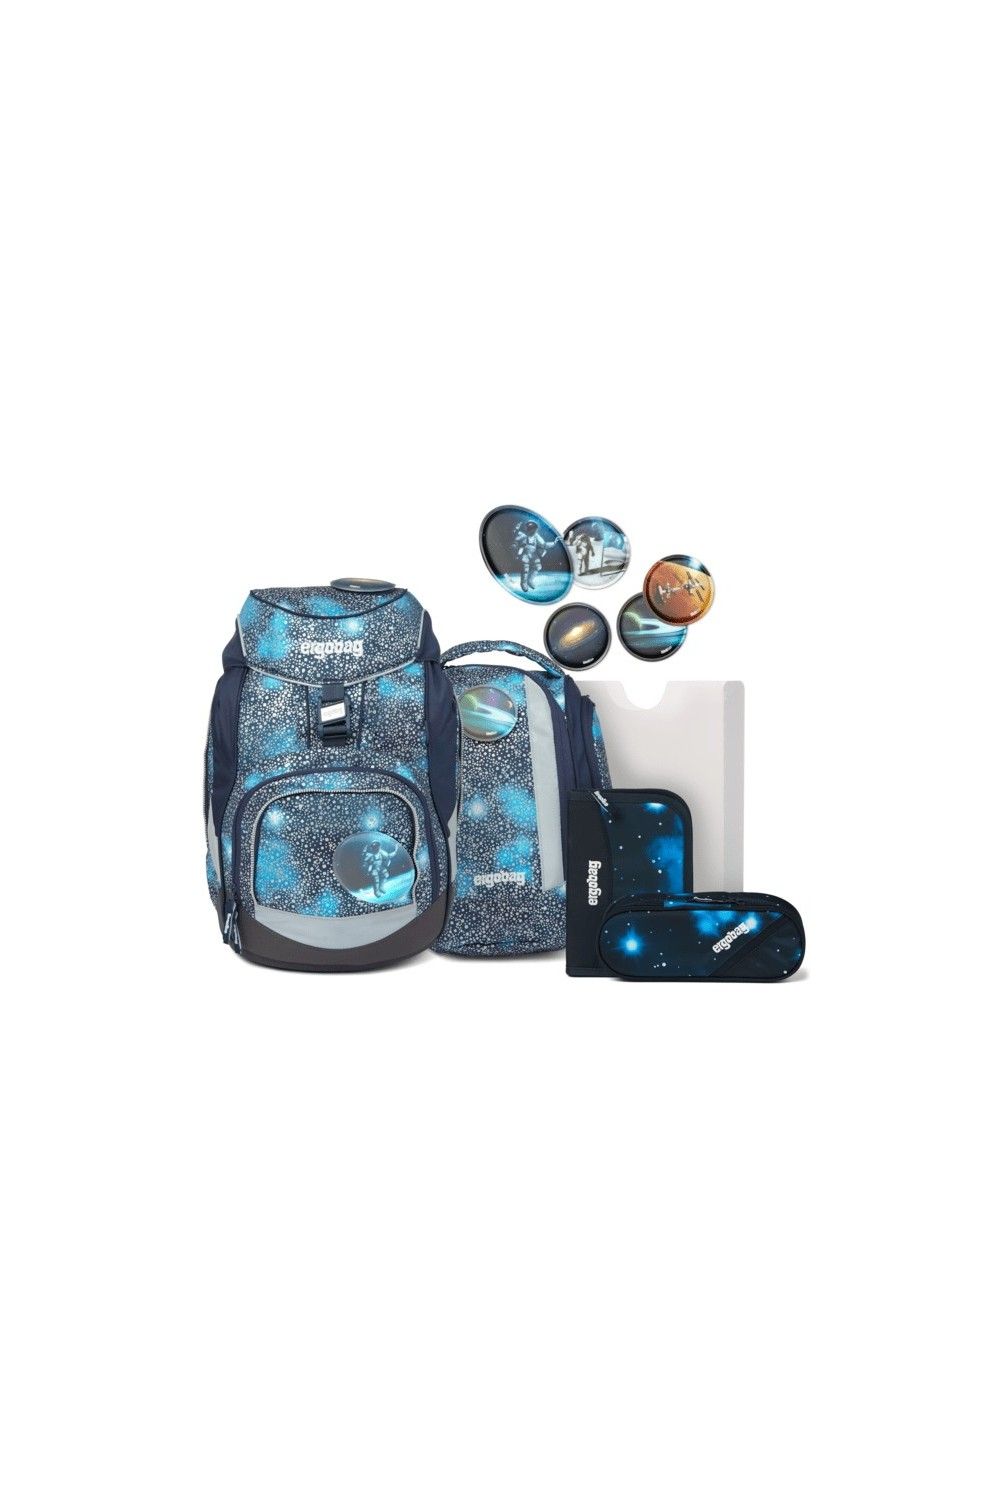 sac à dos scolaire pack ergobag 6 pièces Limited Edition Bär Anhalter durch Galaxis